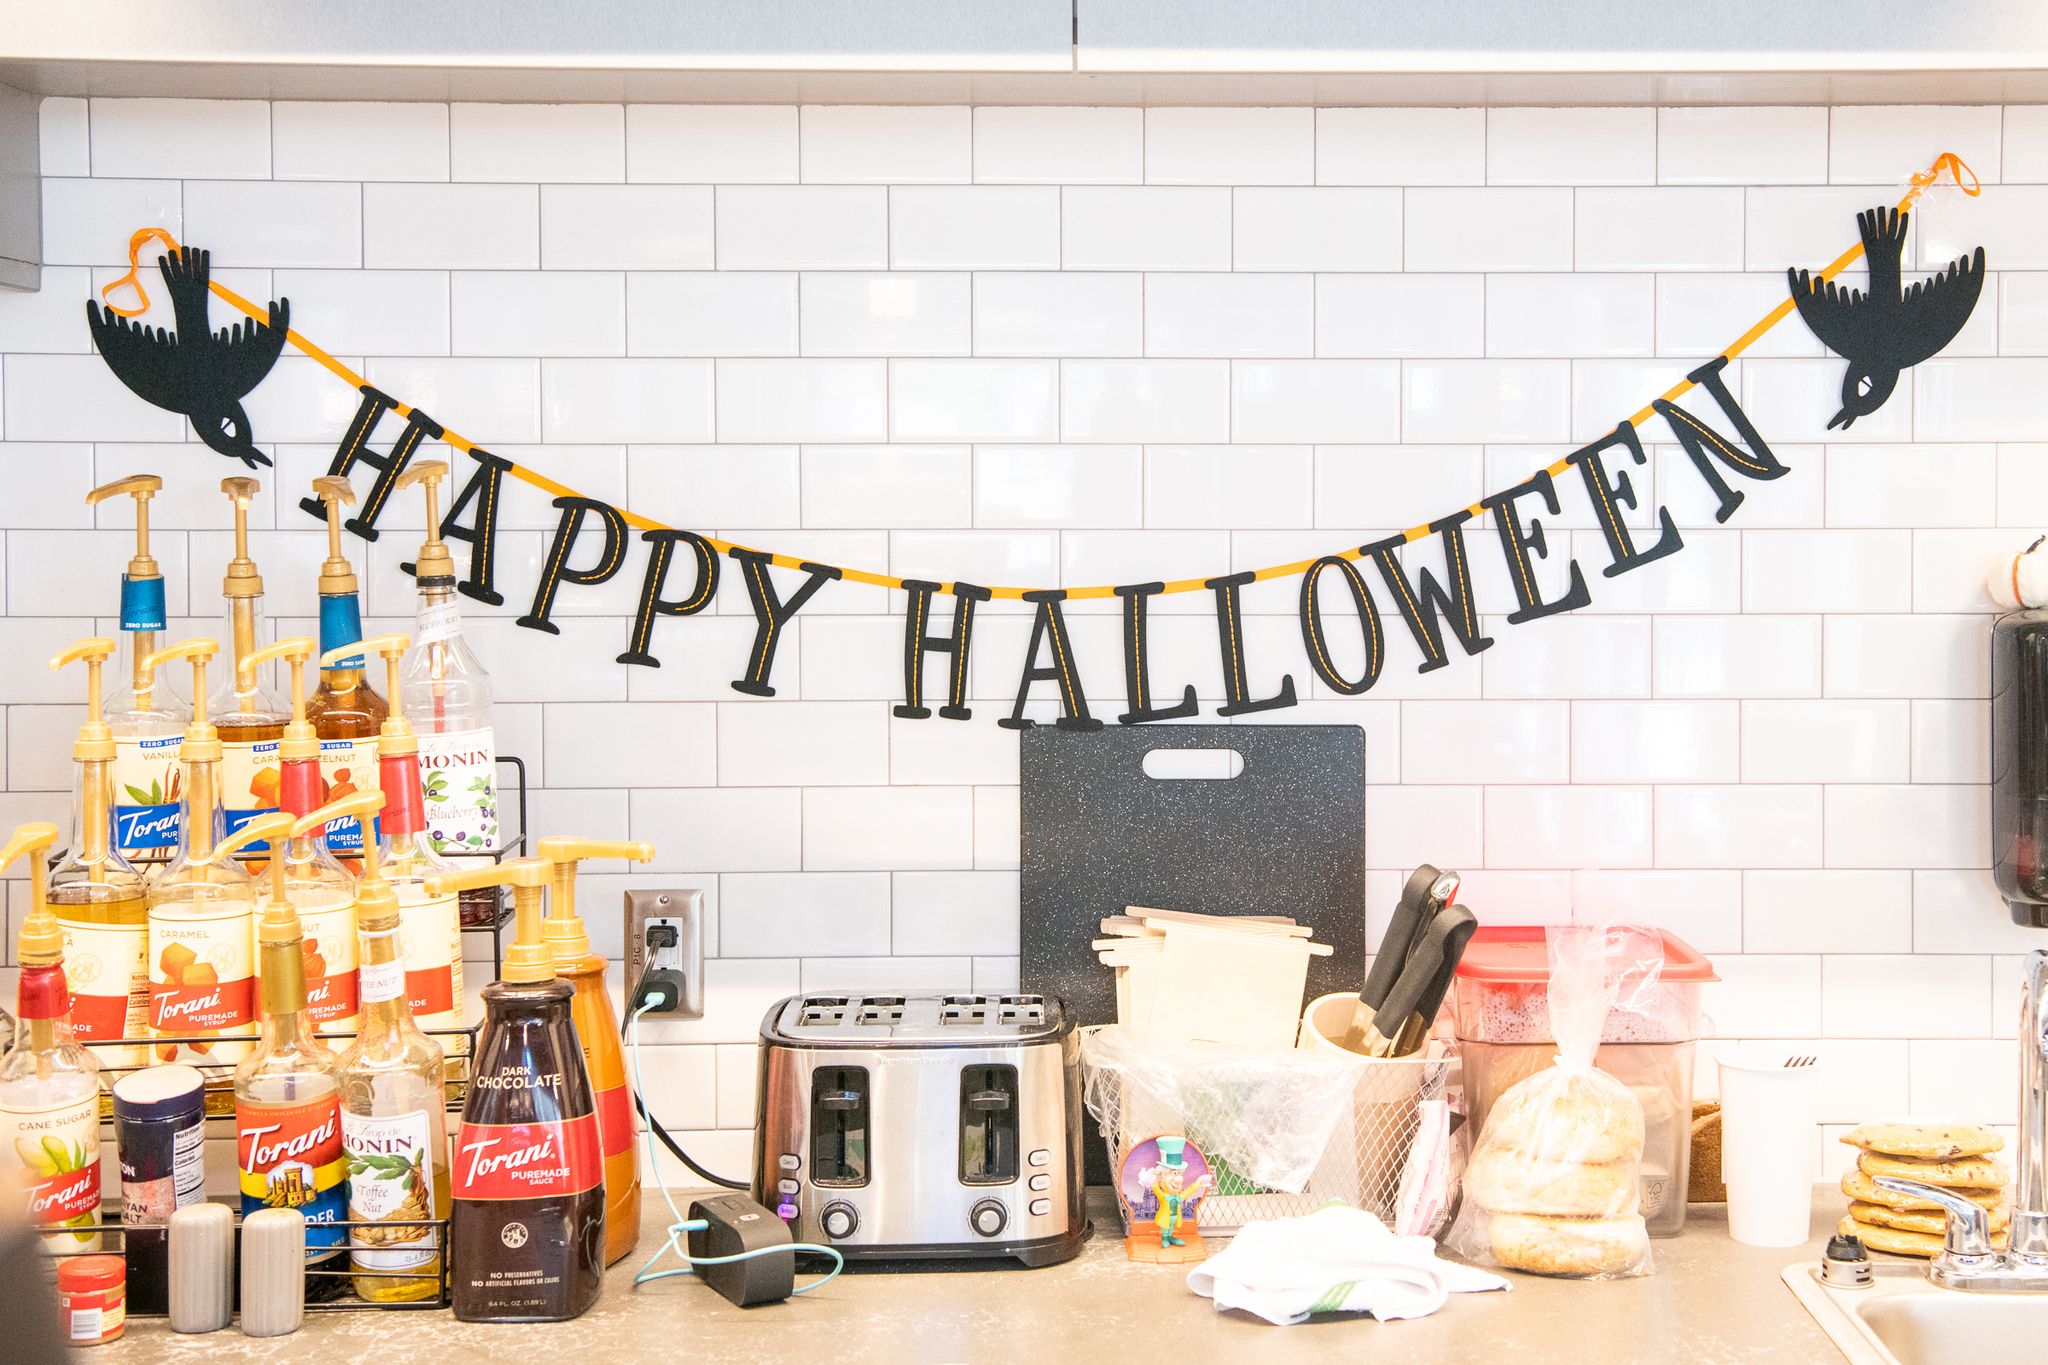 A Happy Halloween banner hangs over the coffee counter at Lil's Coffee Bar.